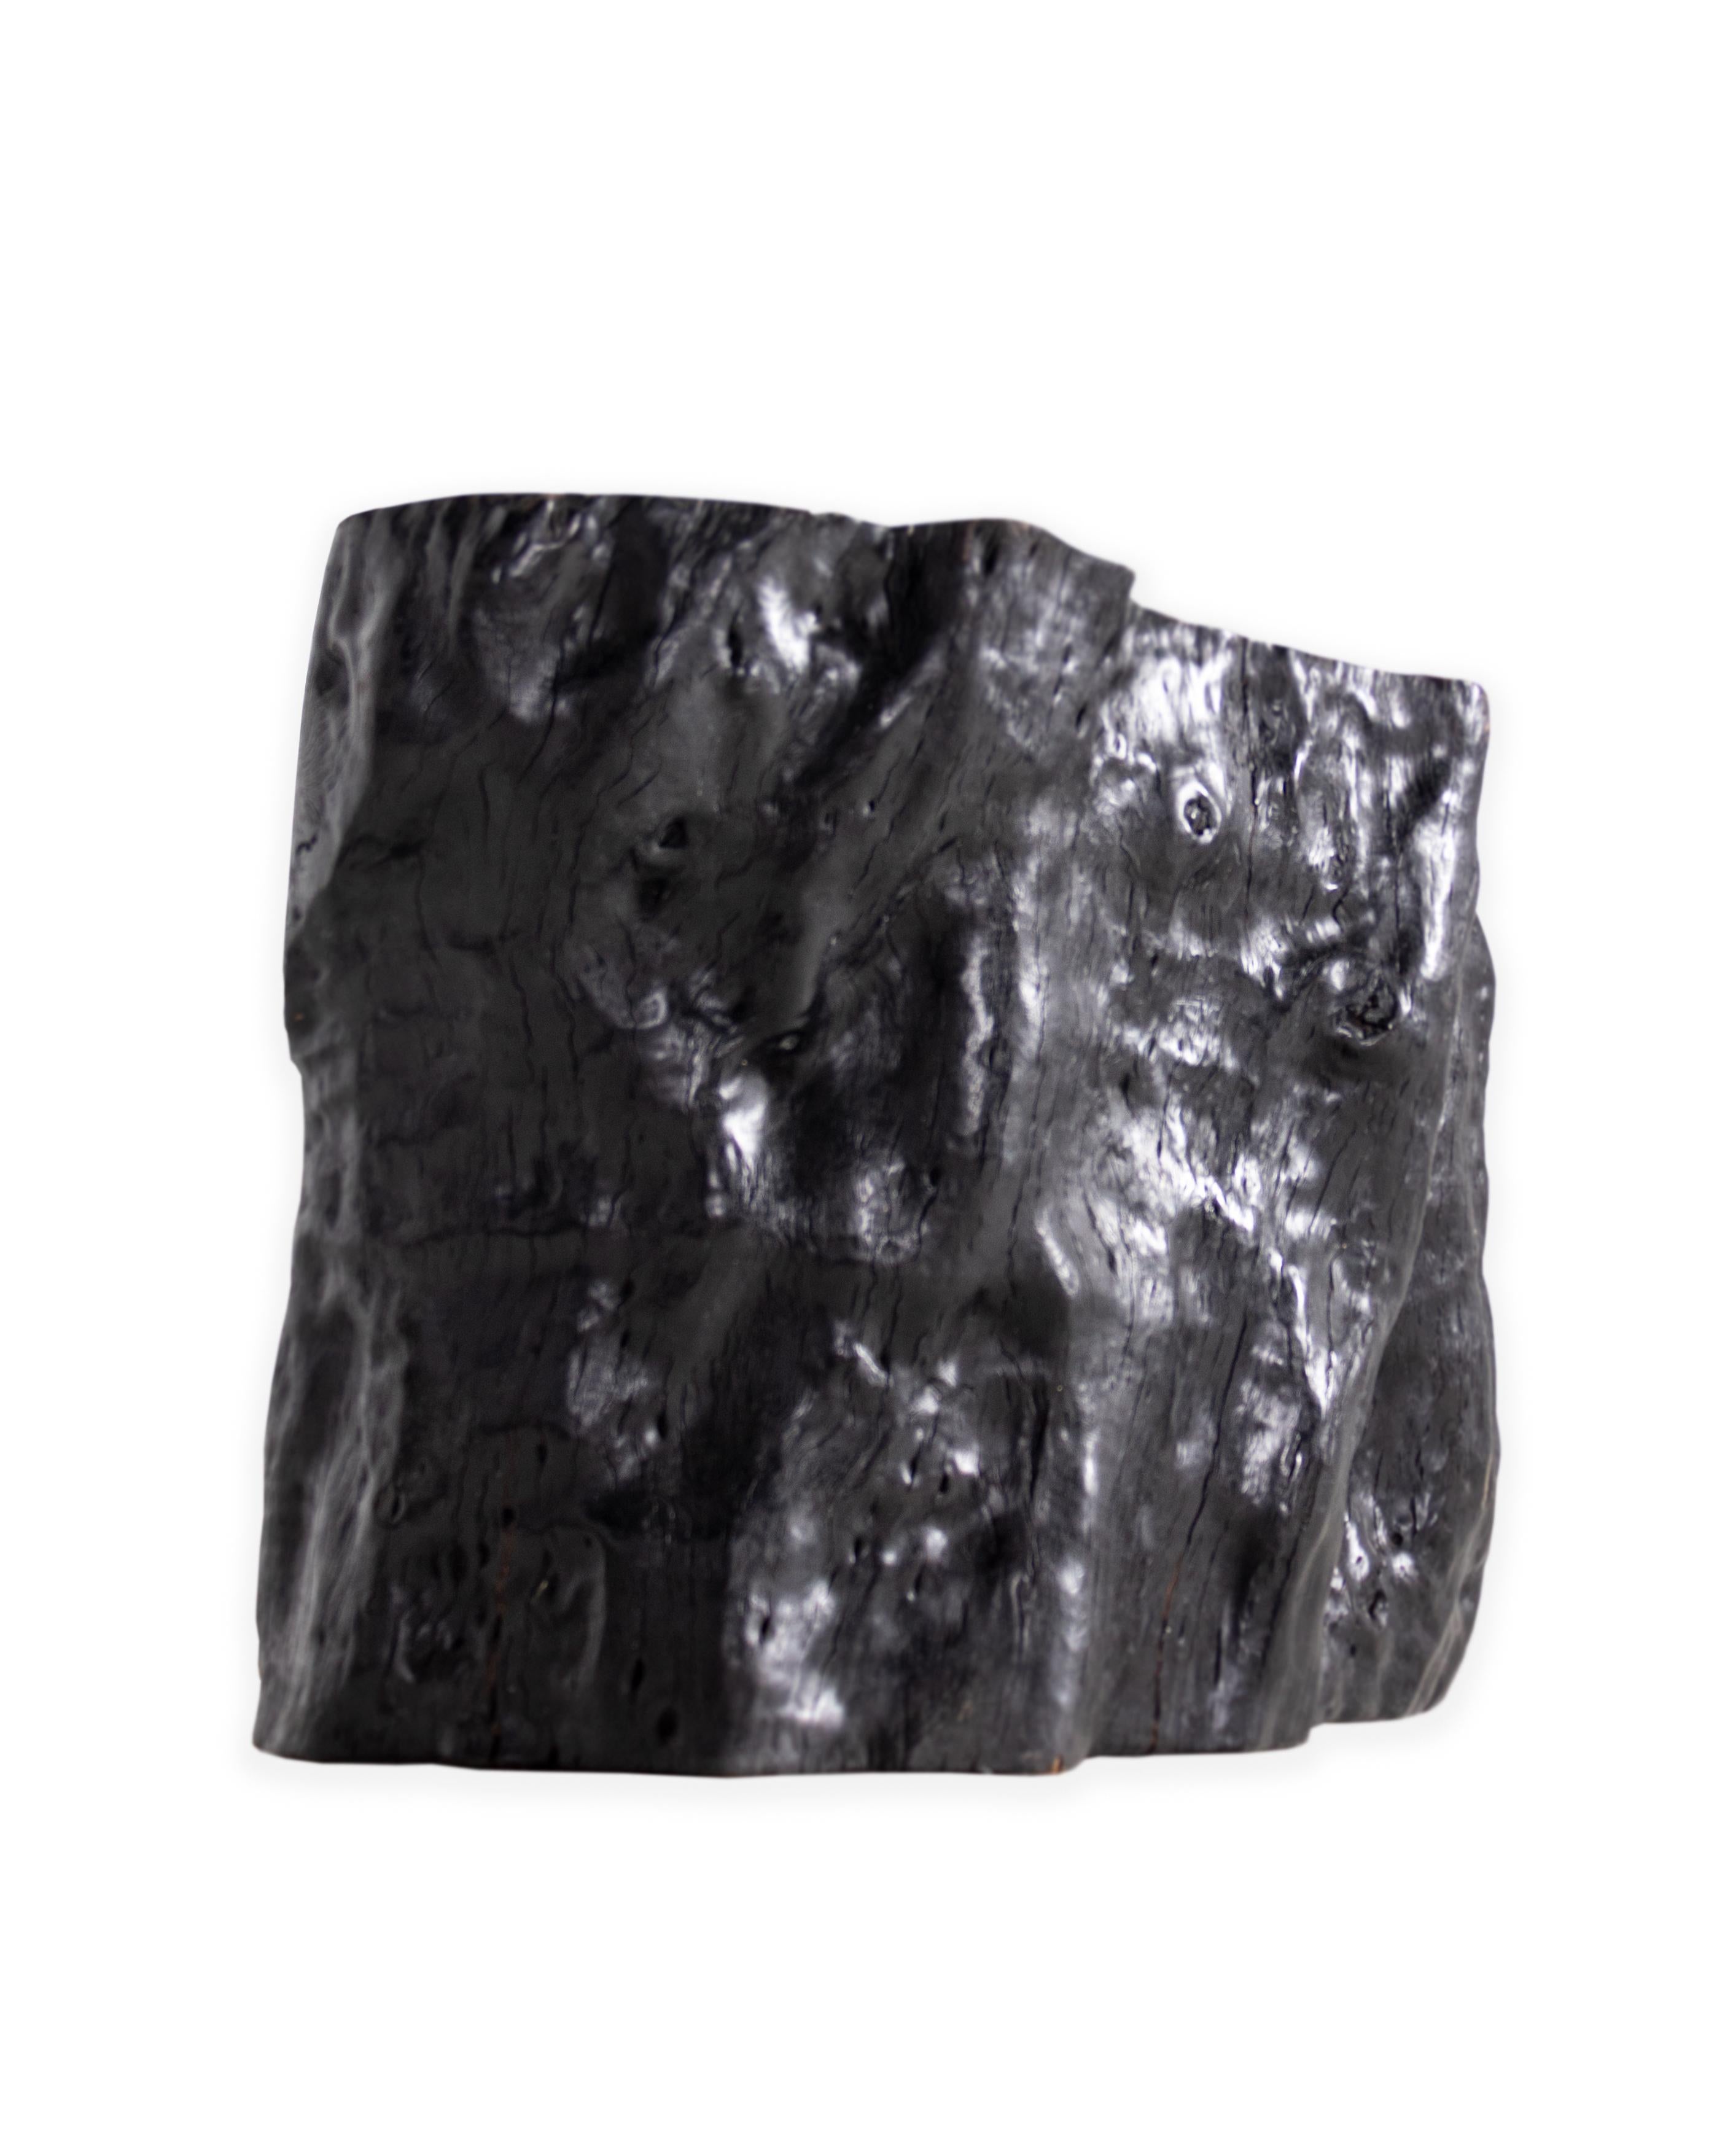 Ebonized lychee wood organic form side table. 

Piece from the Le Monde collection. Exclusive to Brendan Bass.
   